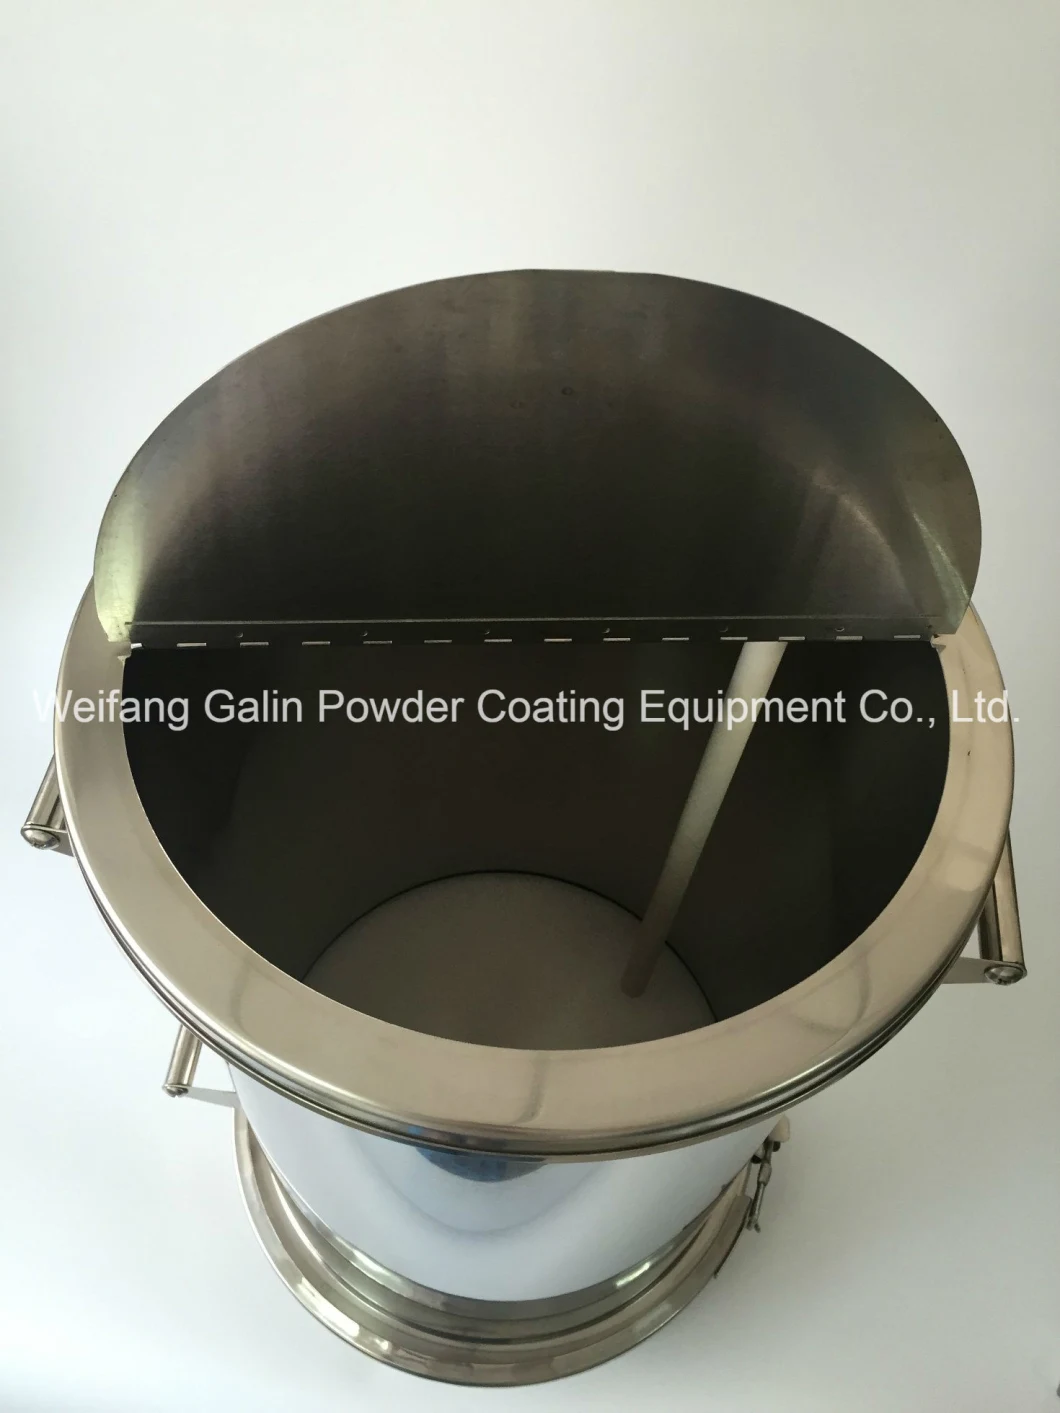 Small Stainless Steel Powder Tank for Little Metal Coating/Paint/Spray